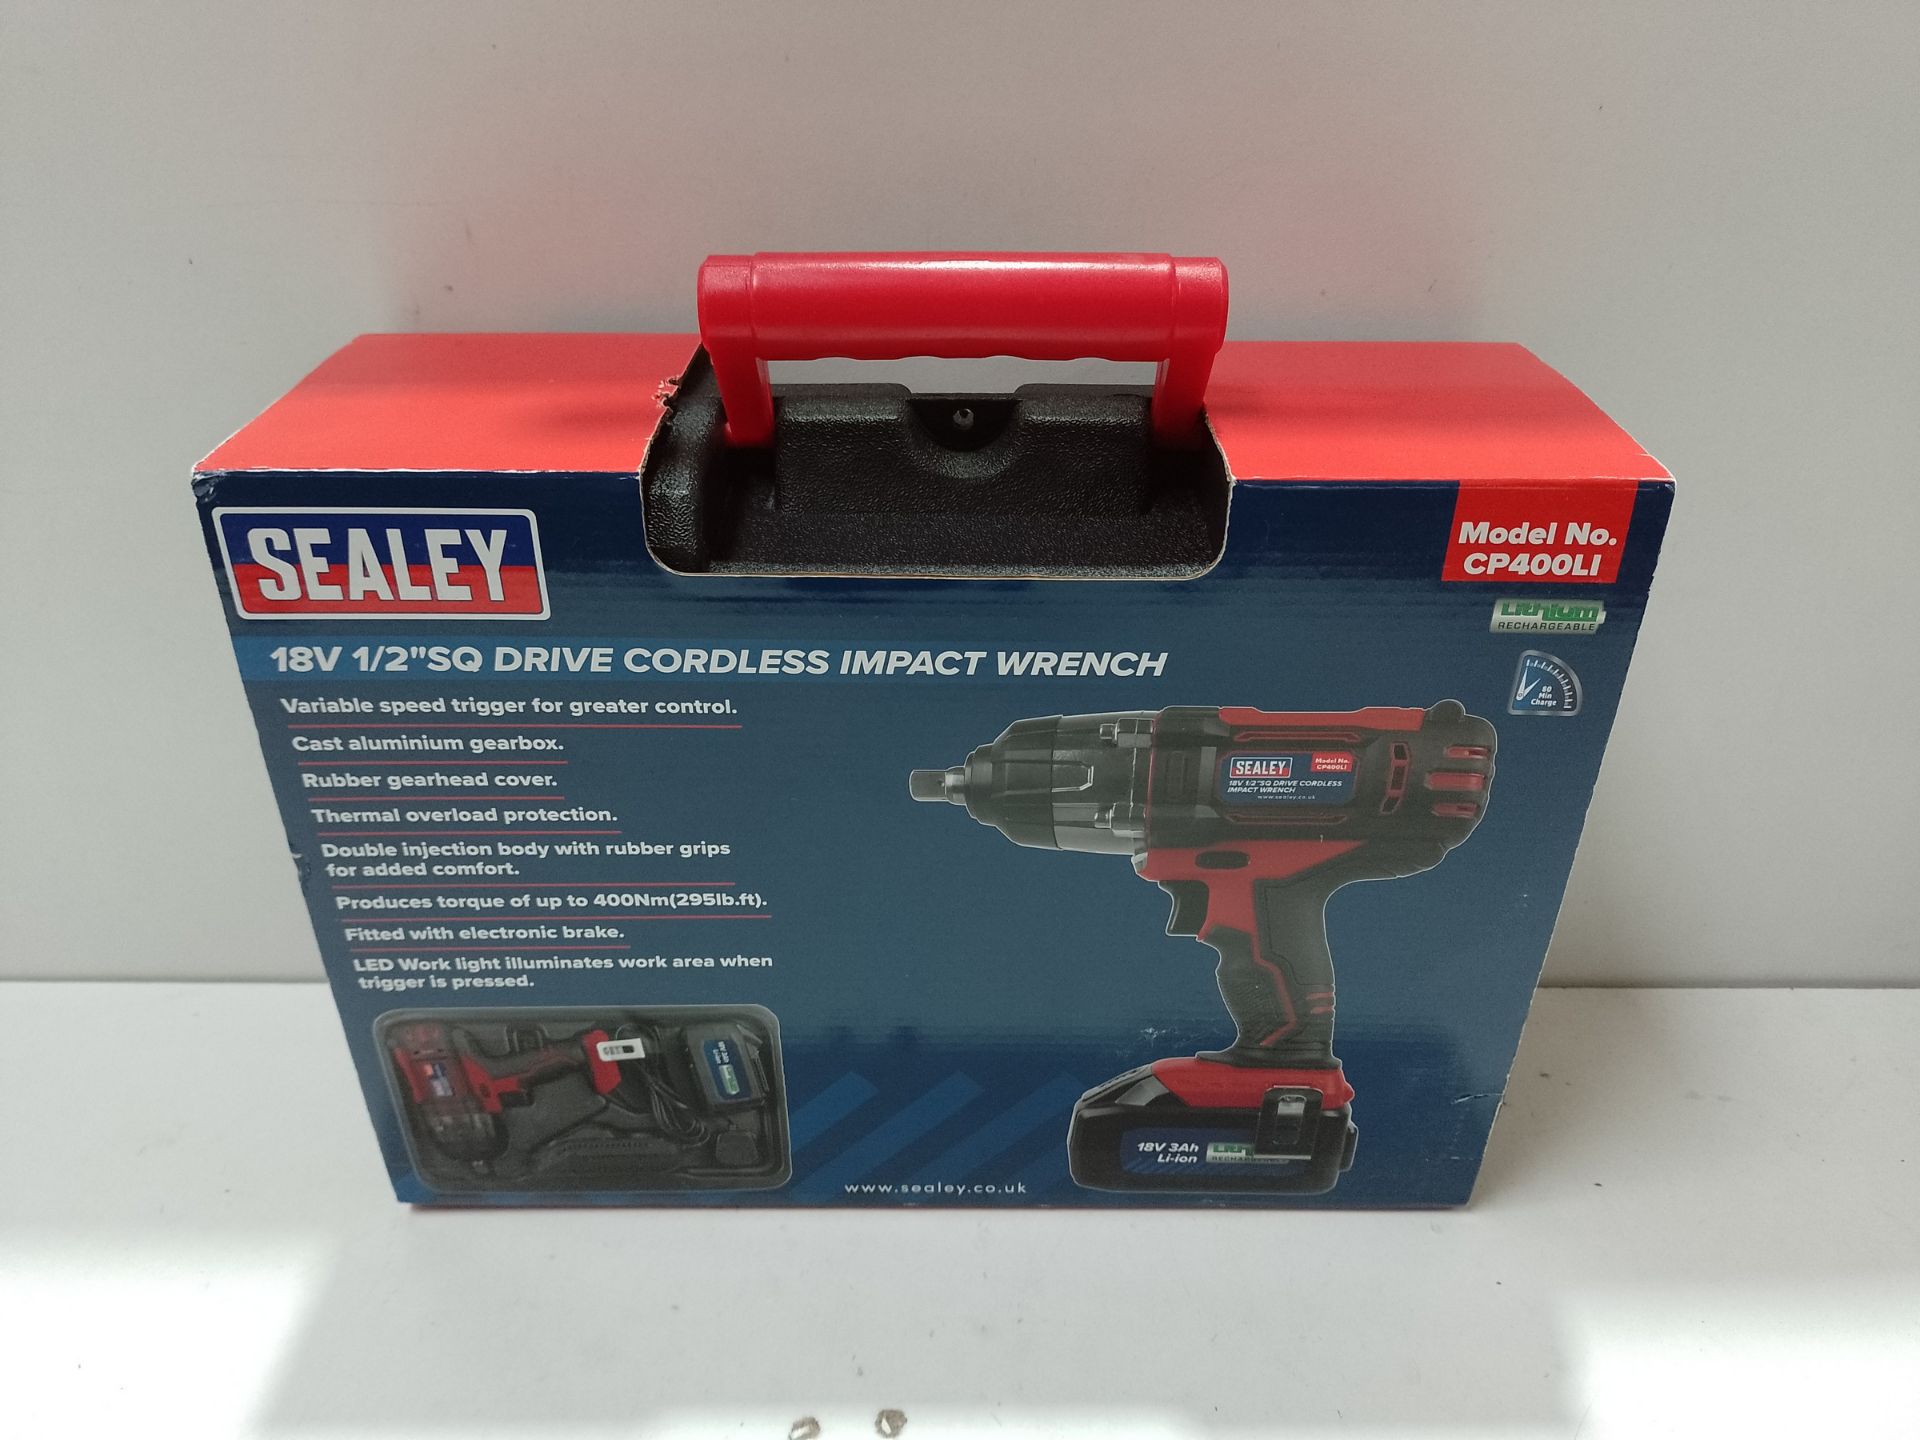 RRP £112.78 Sealey 18V 1/2" Sq Drive Cordless Impact Wrench - Red - Image 2 of 2